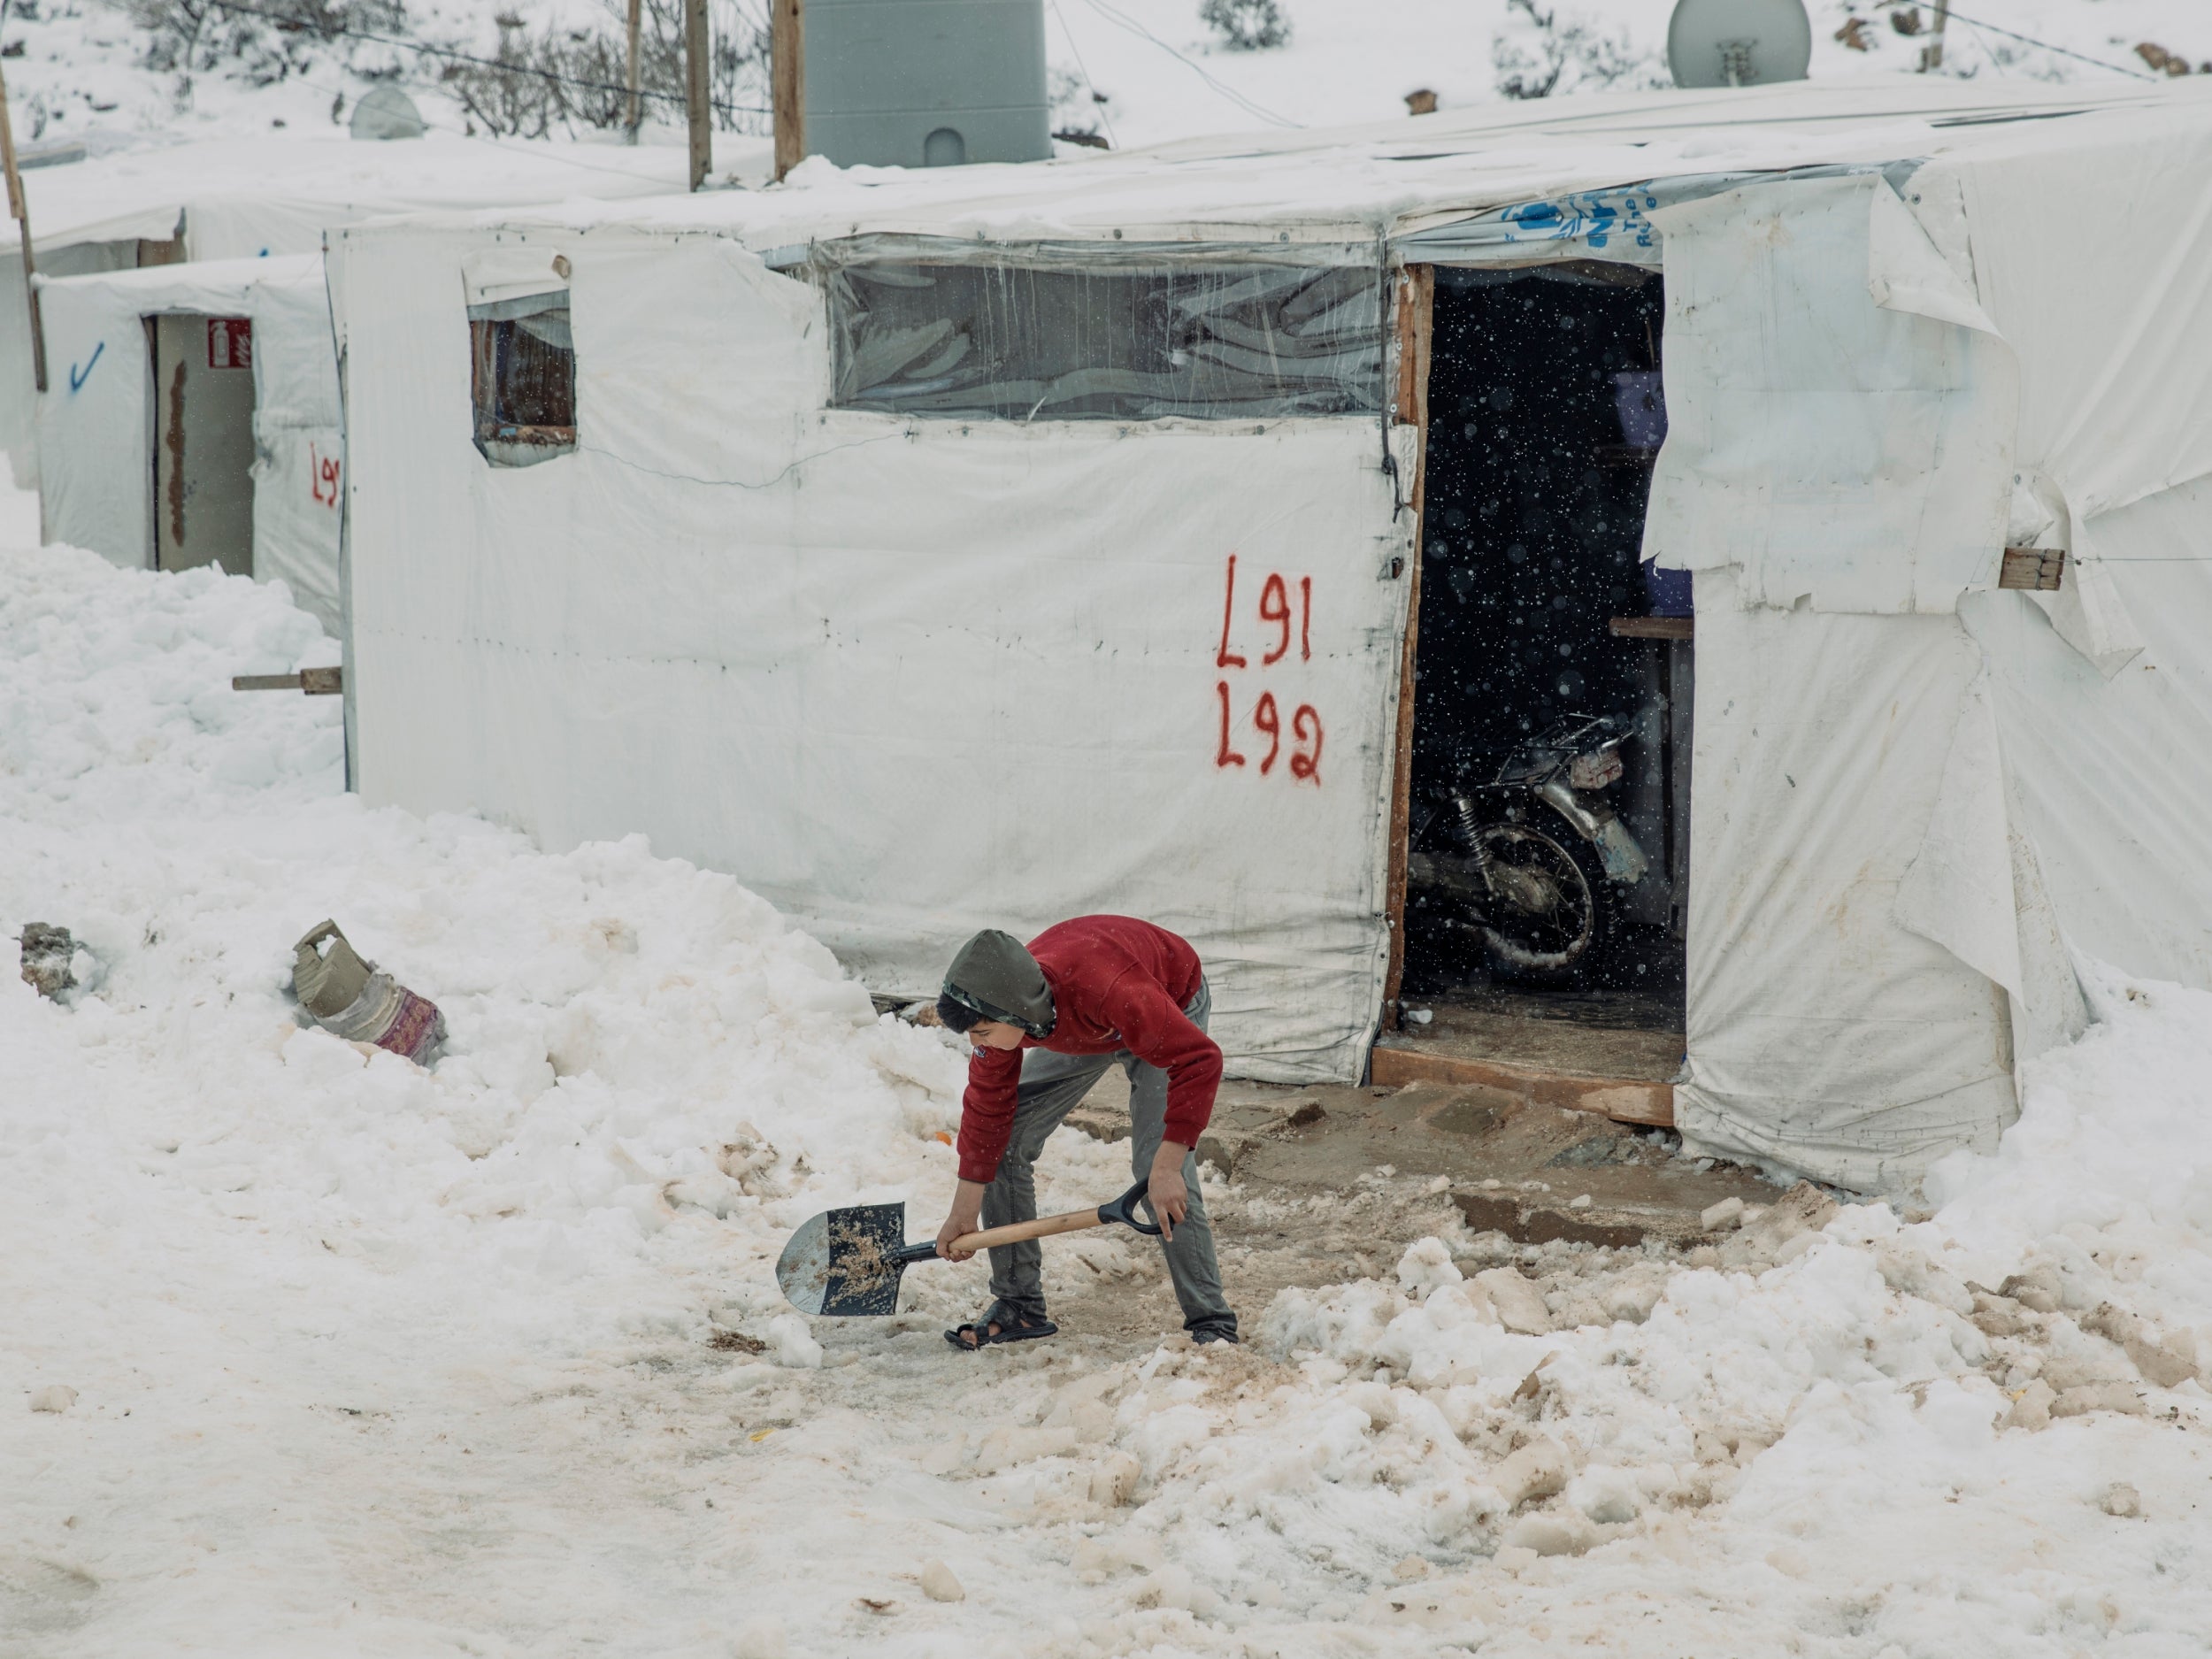 A young boy, dressed in sandals, clears the entrance to his family tent